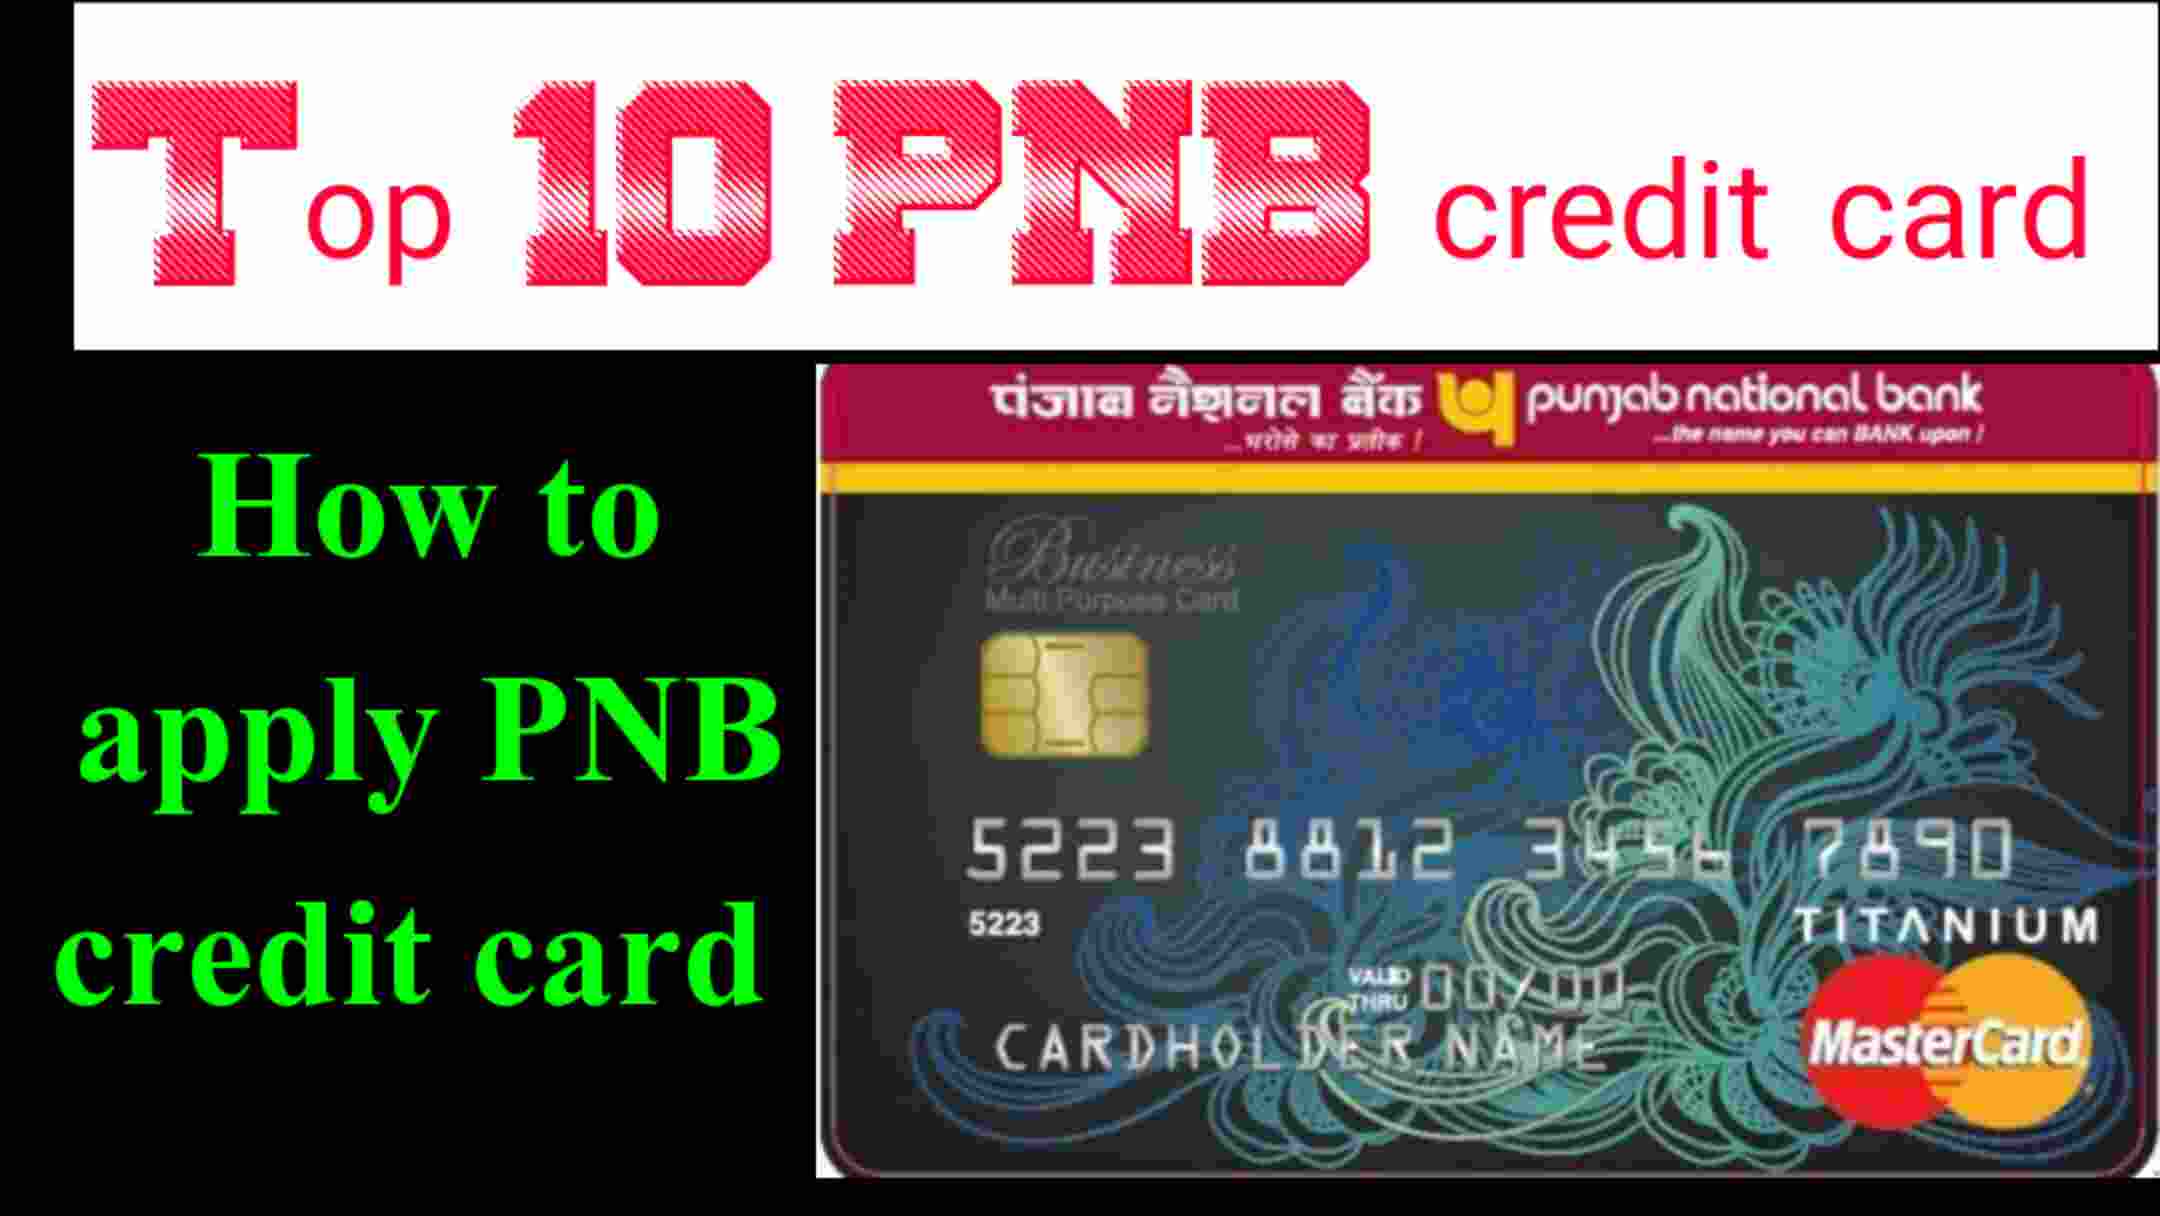 Top 10 PNB Credit Card apply & How to Apply for PNB Credit Card/